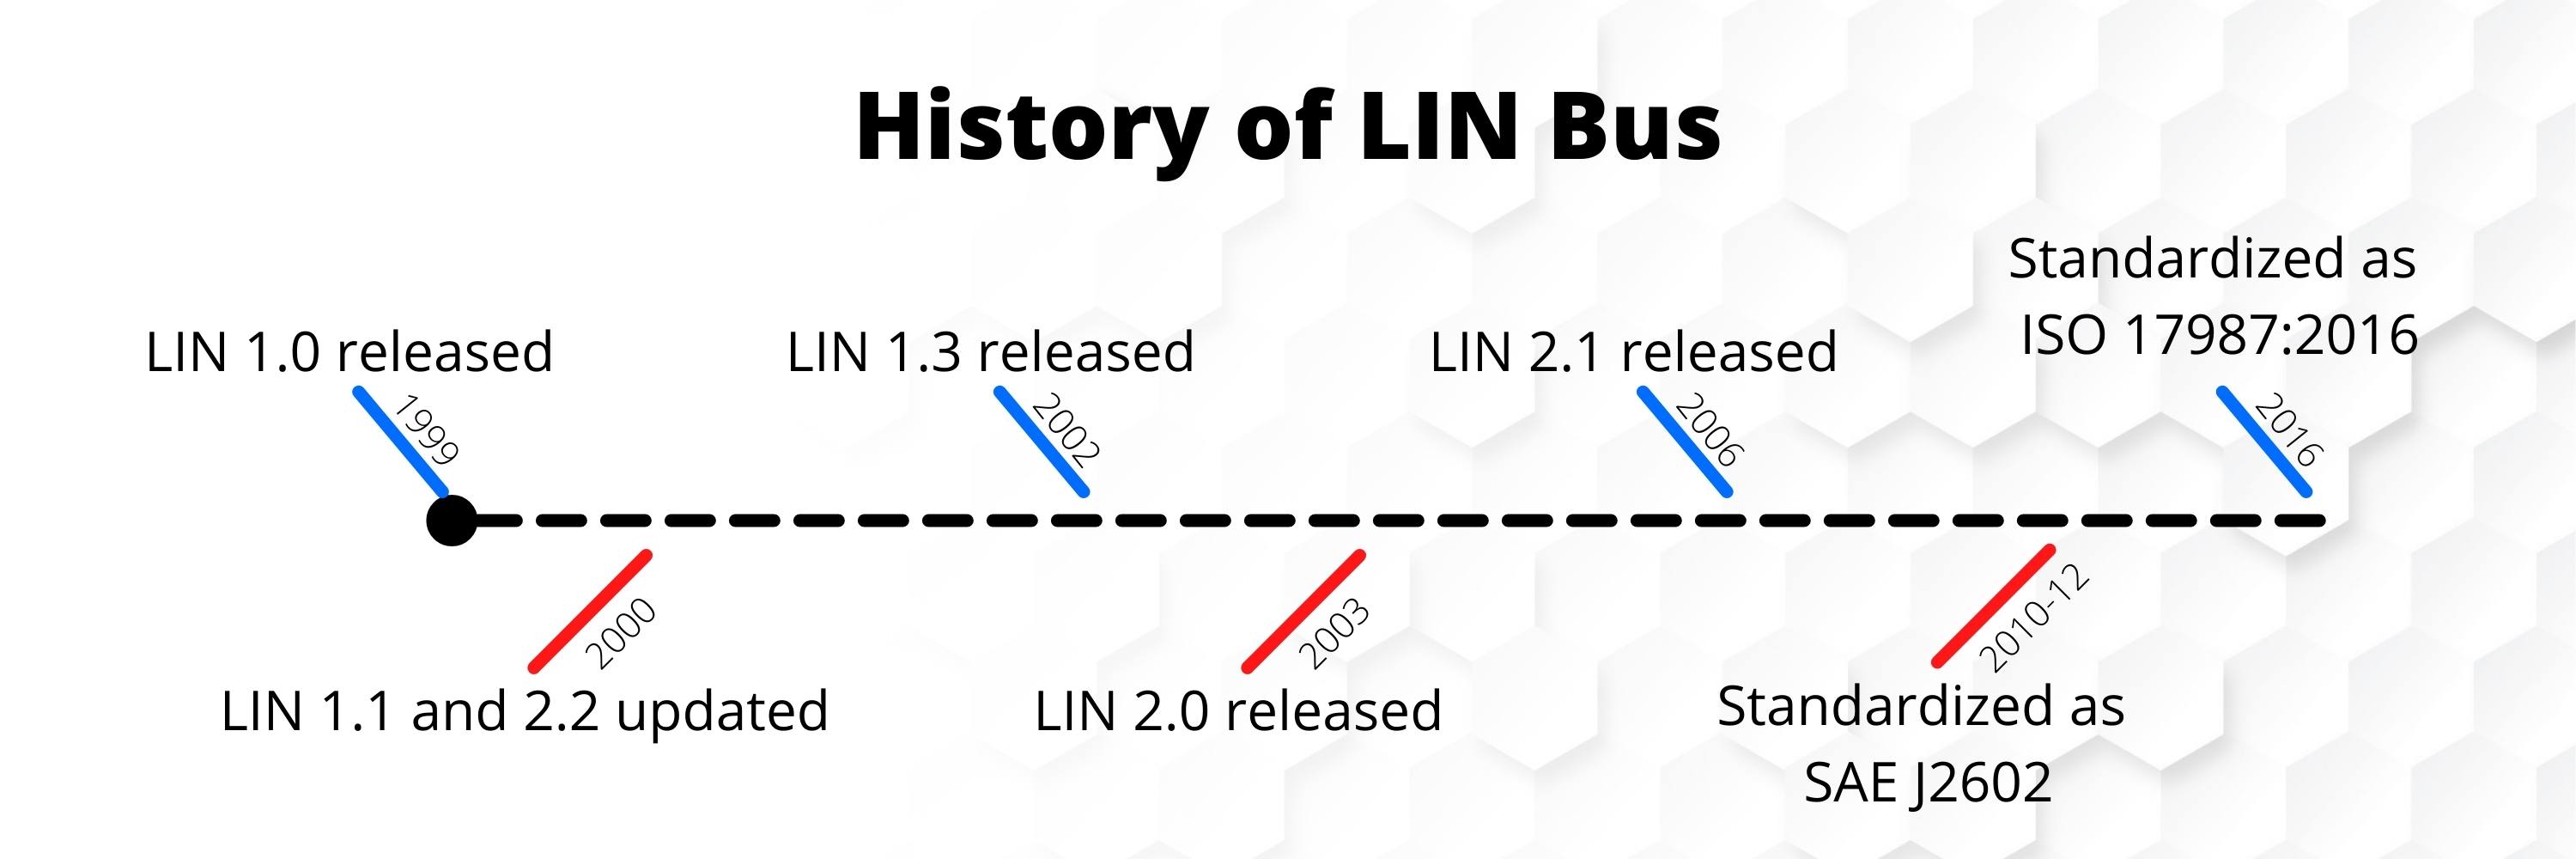 a timeline showing the history of lin bus